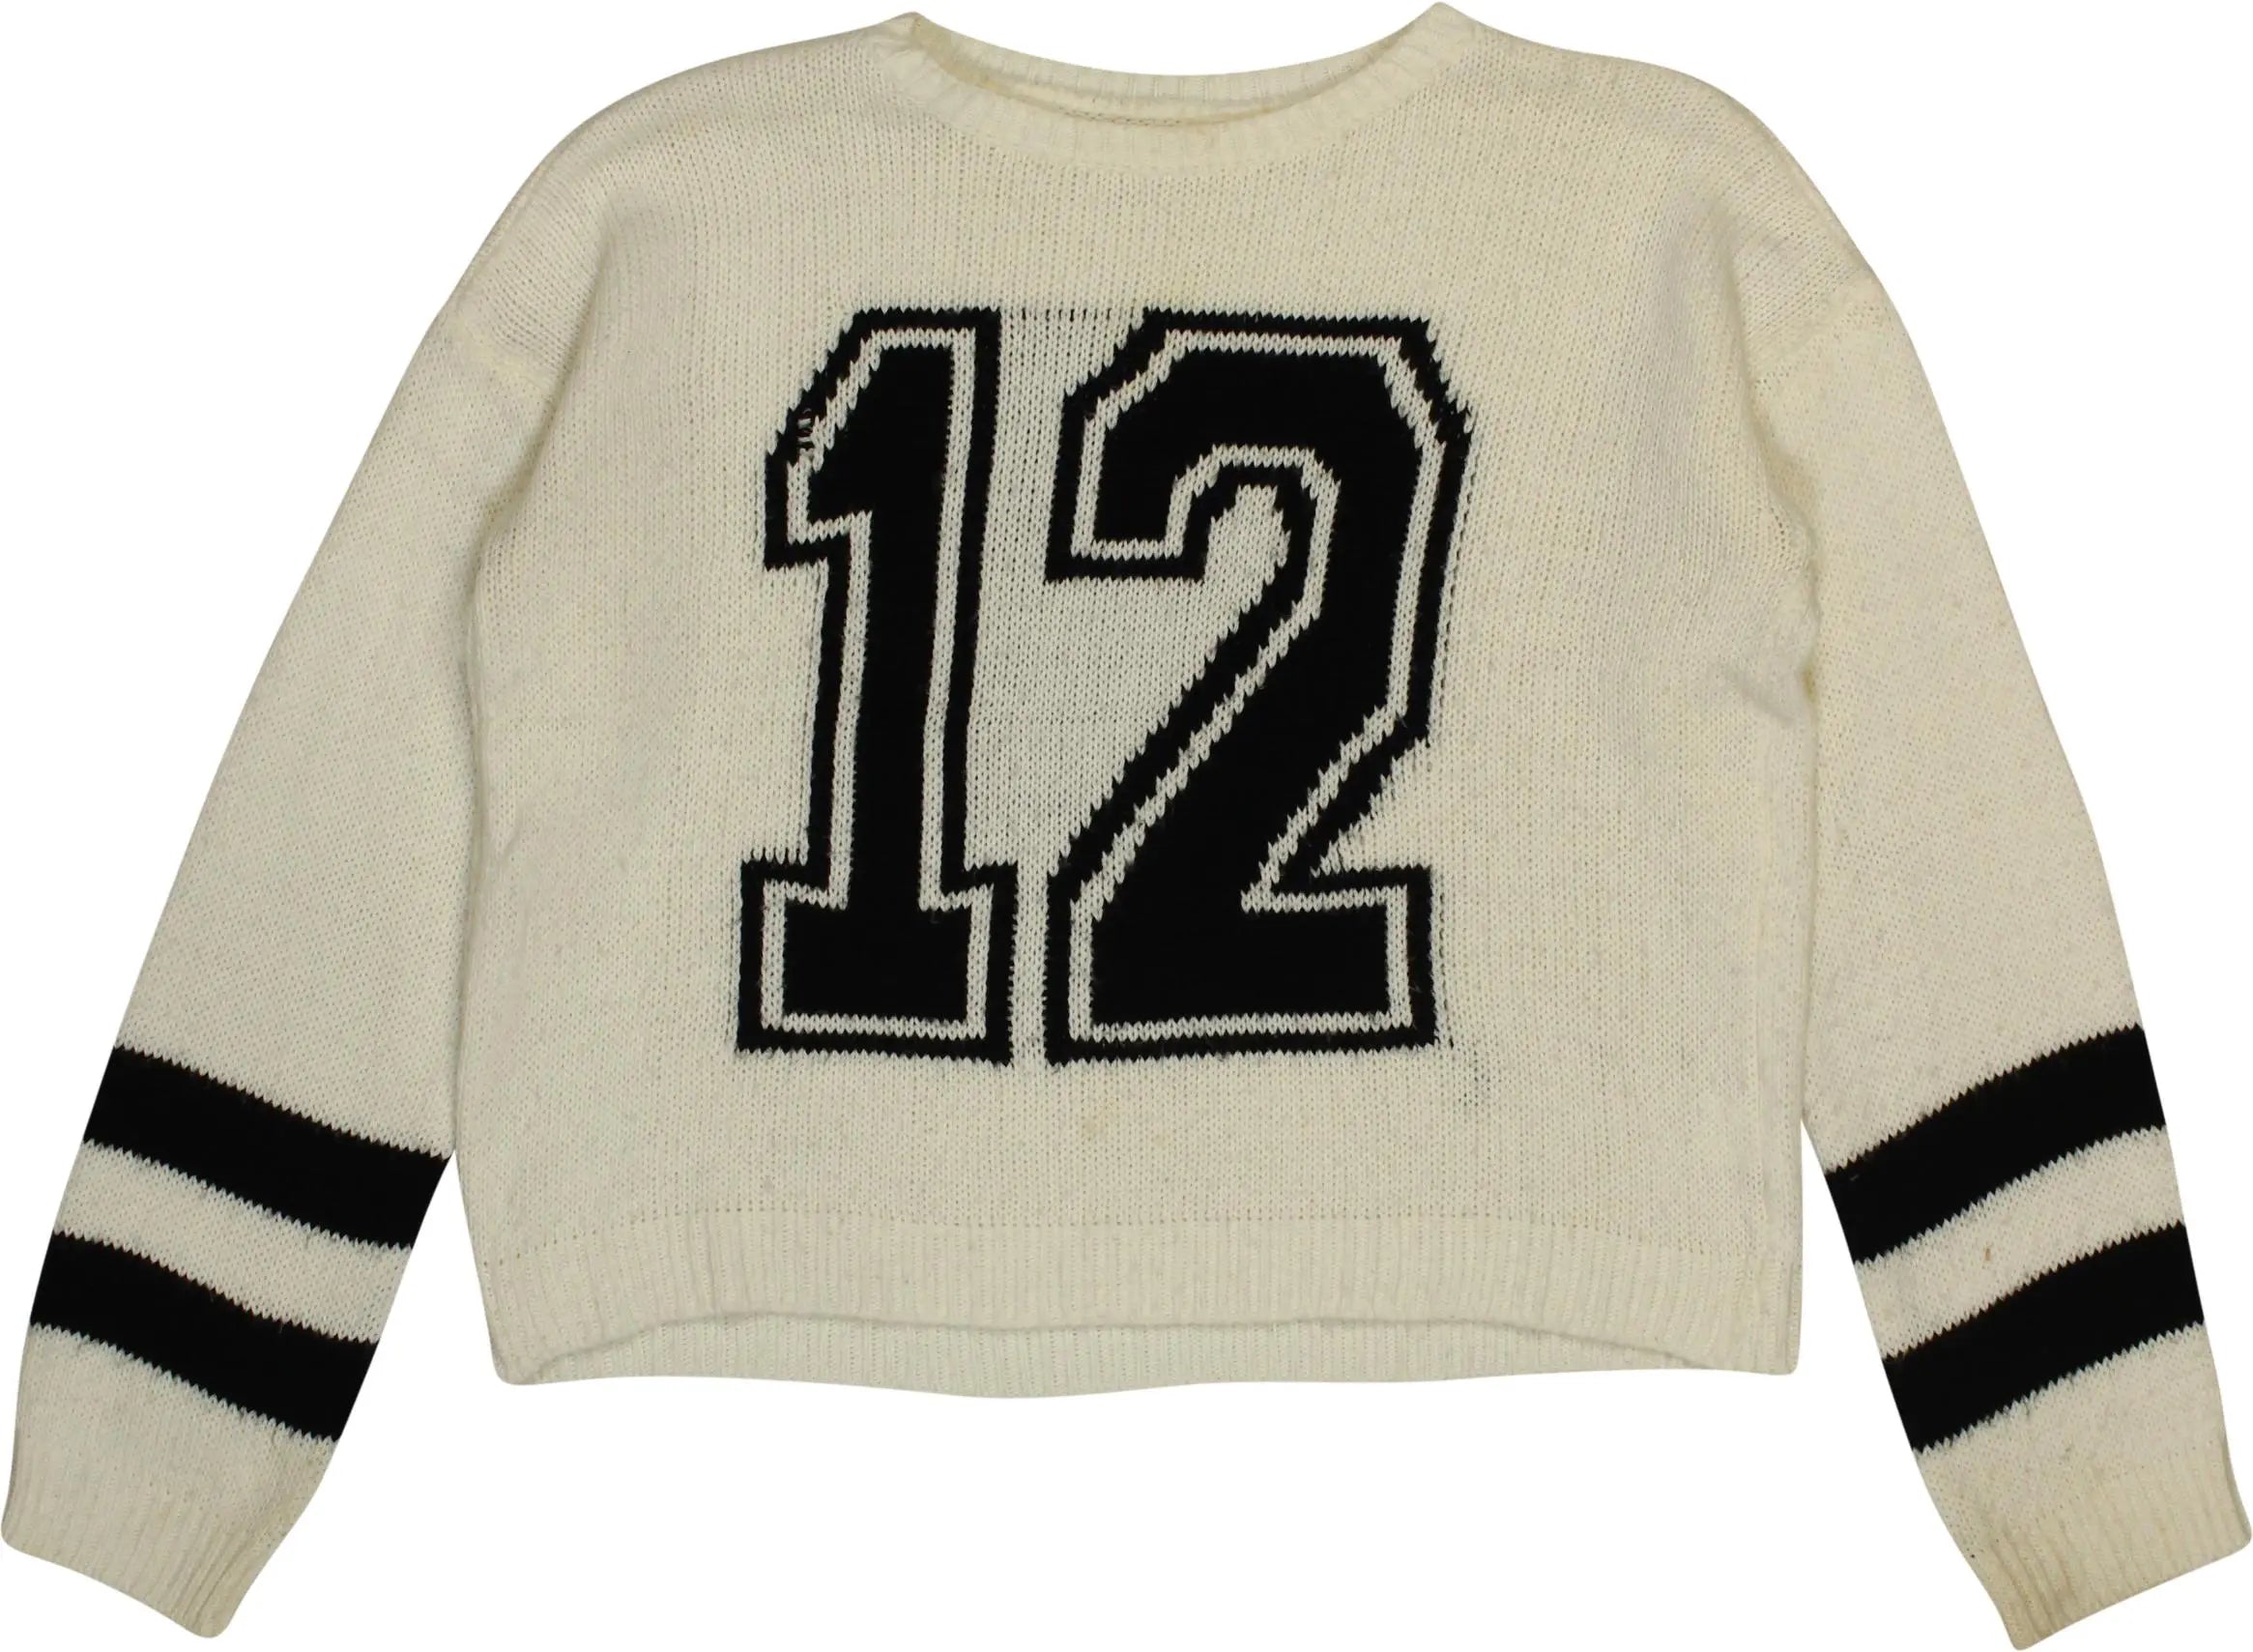 Unknown - 'Nr 12' Jumper- ThriftTale.com - Vintage and second handclothing